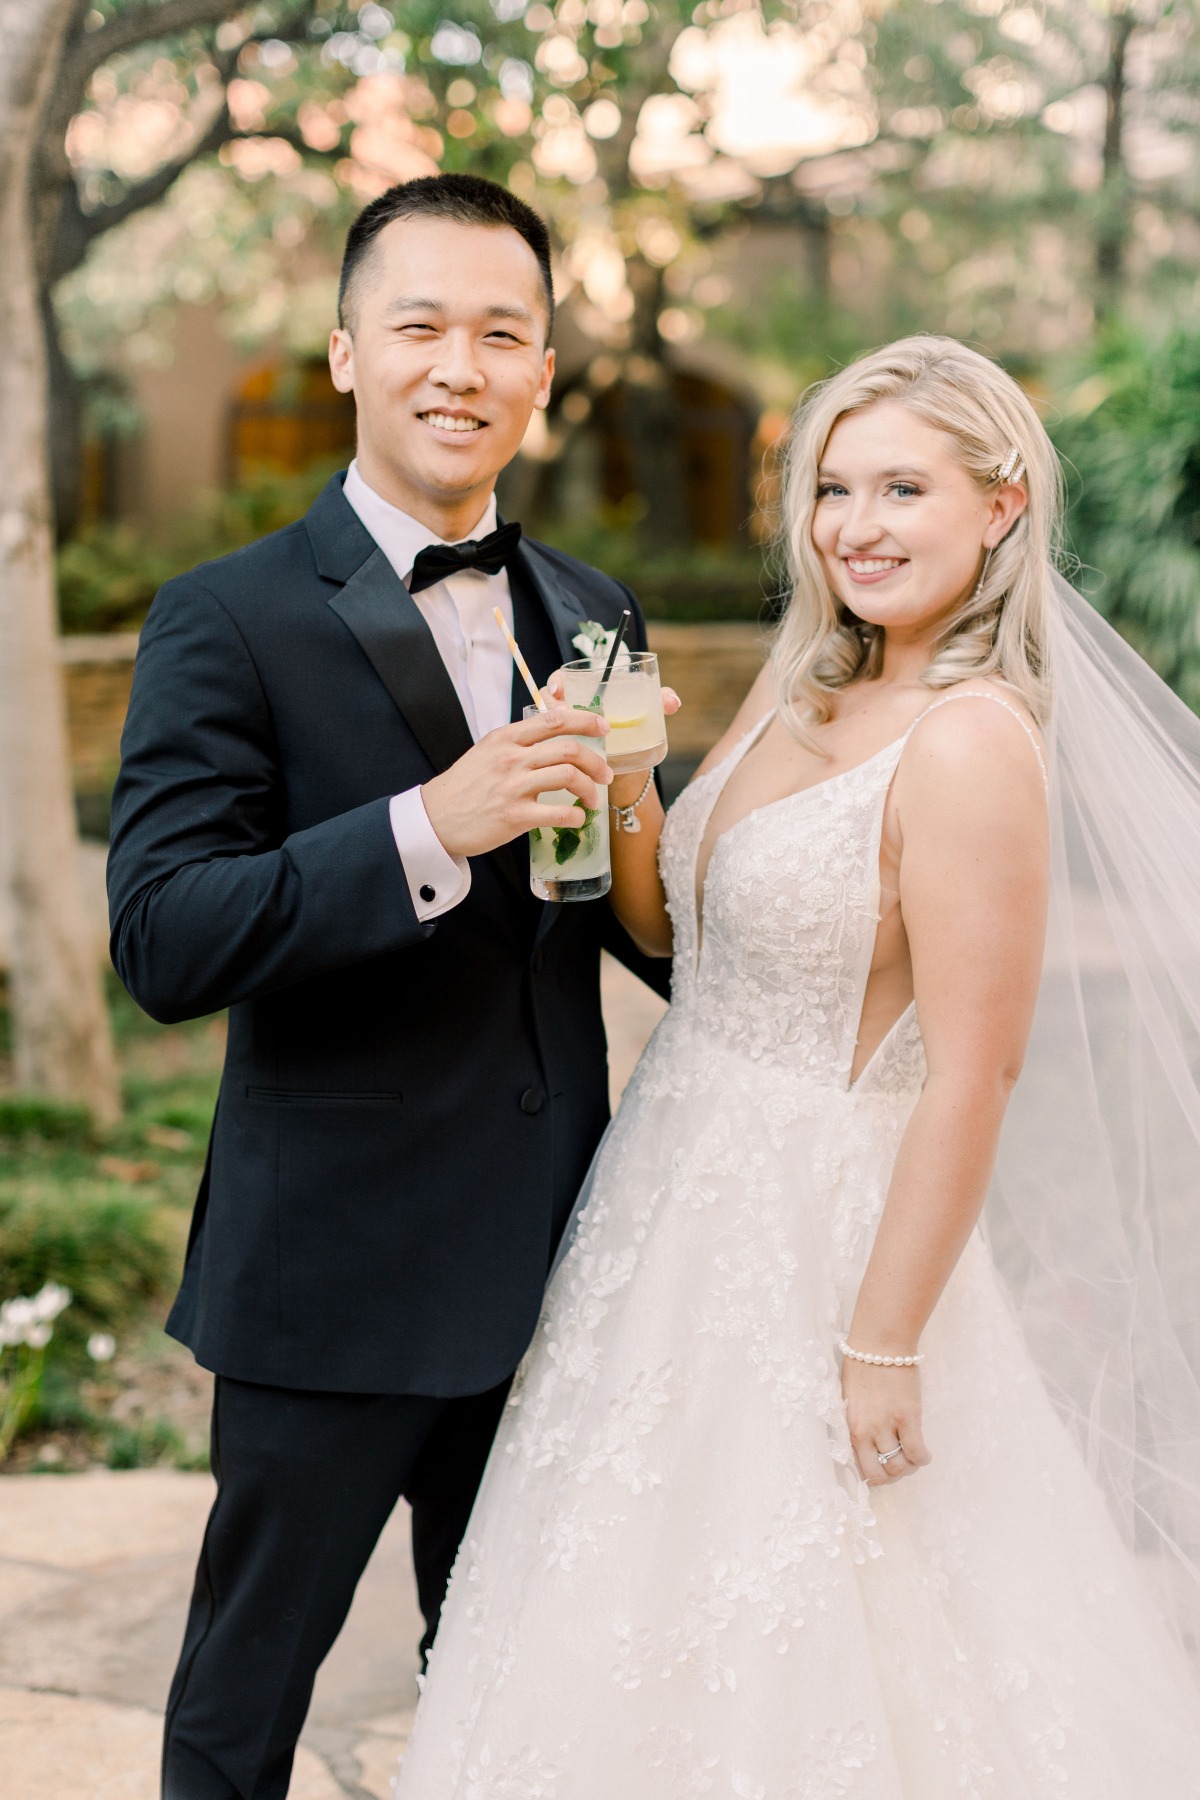 College Sweethearts Tie The Knot In An Intimate Backyard Ceremony